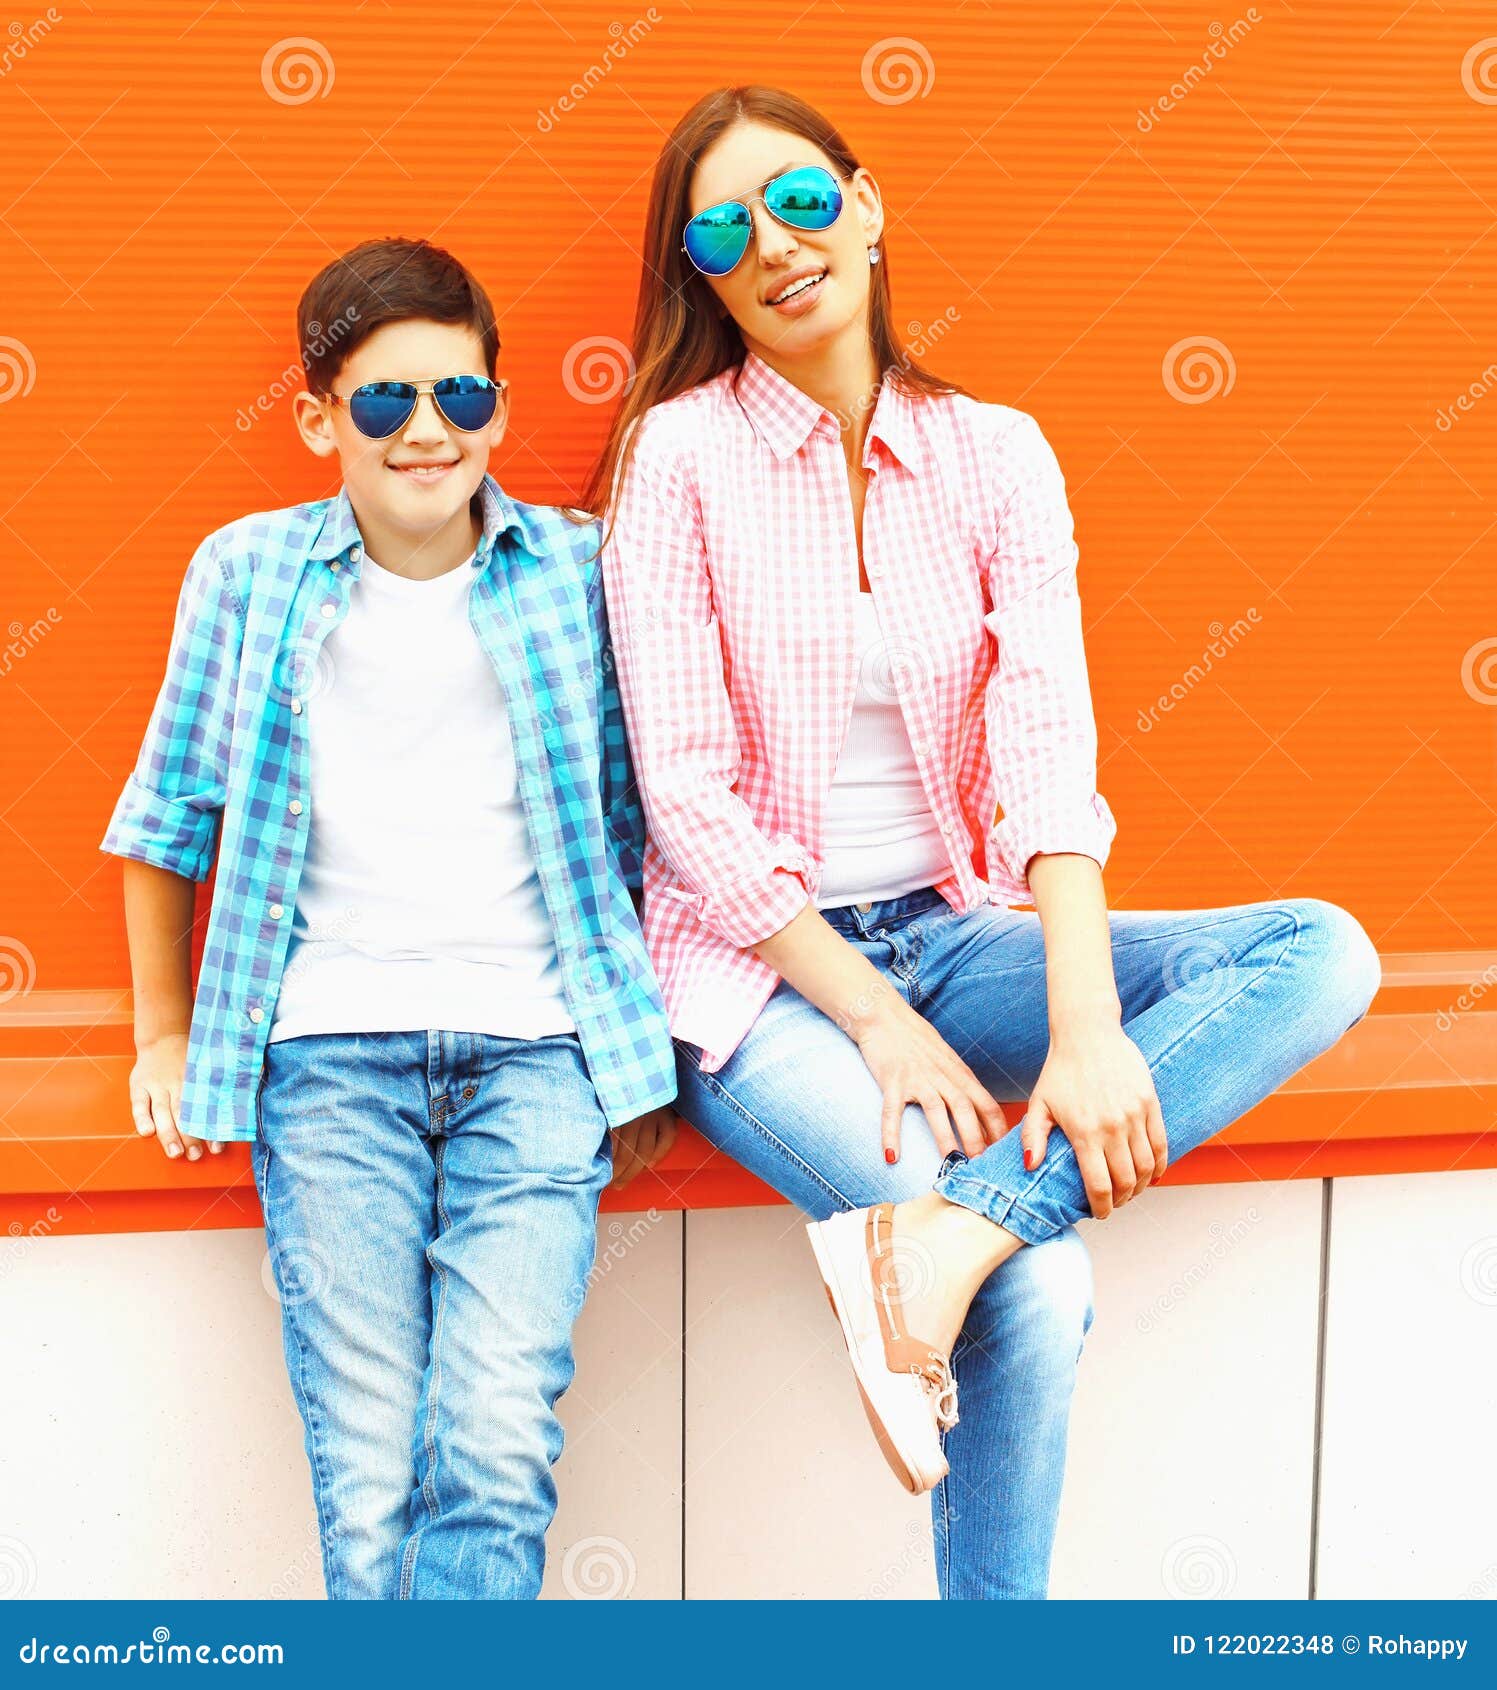 Fashion Mother with Son Teenager in a Sunglasses, Checkered Shirt